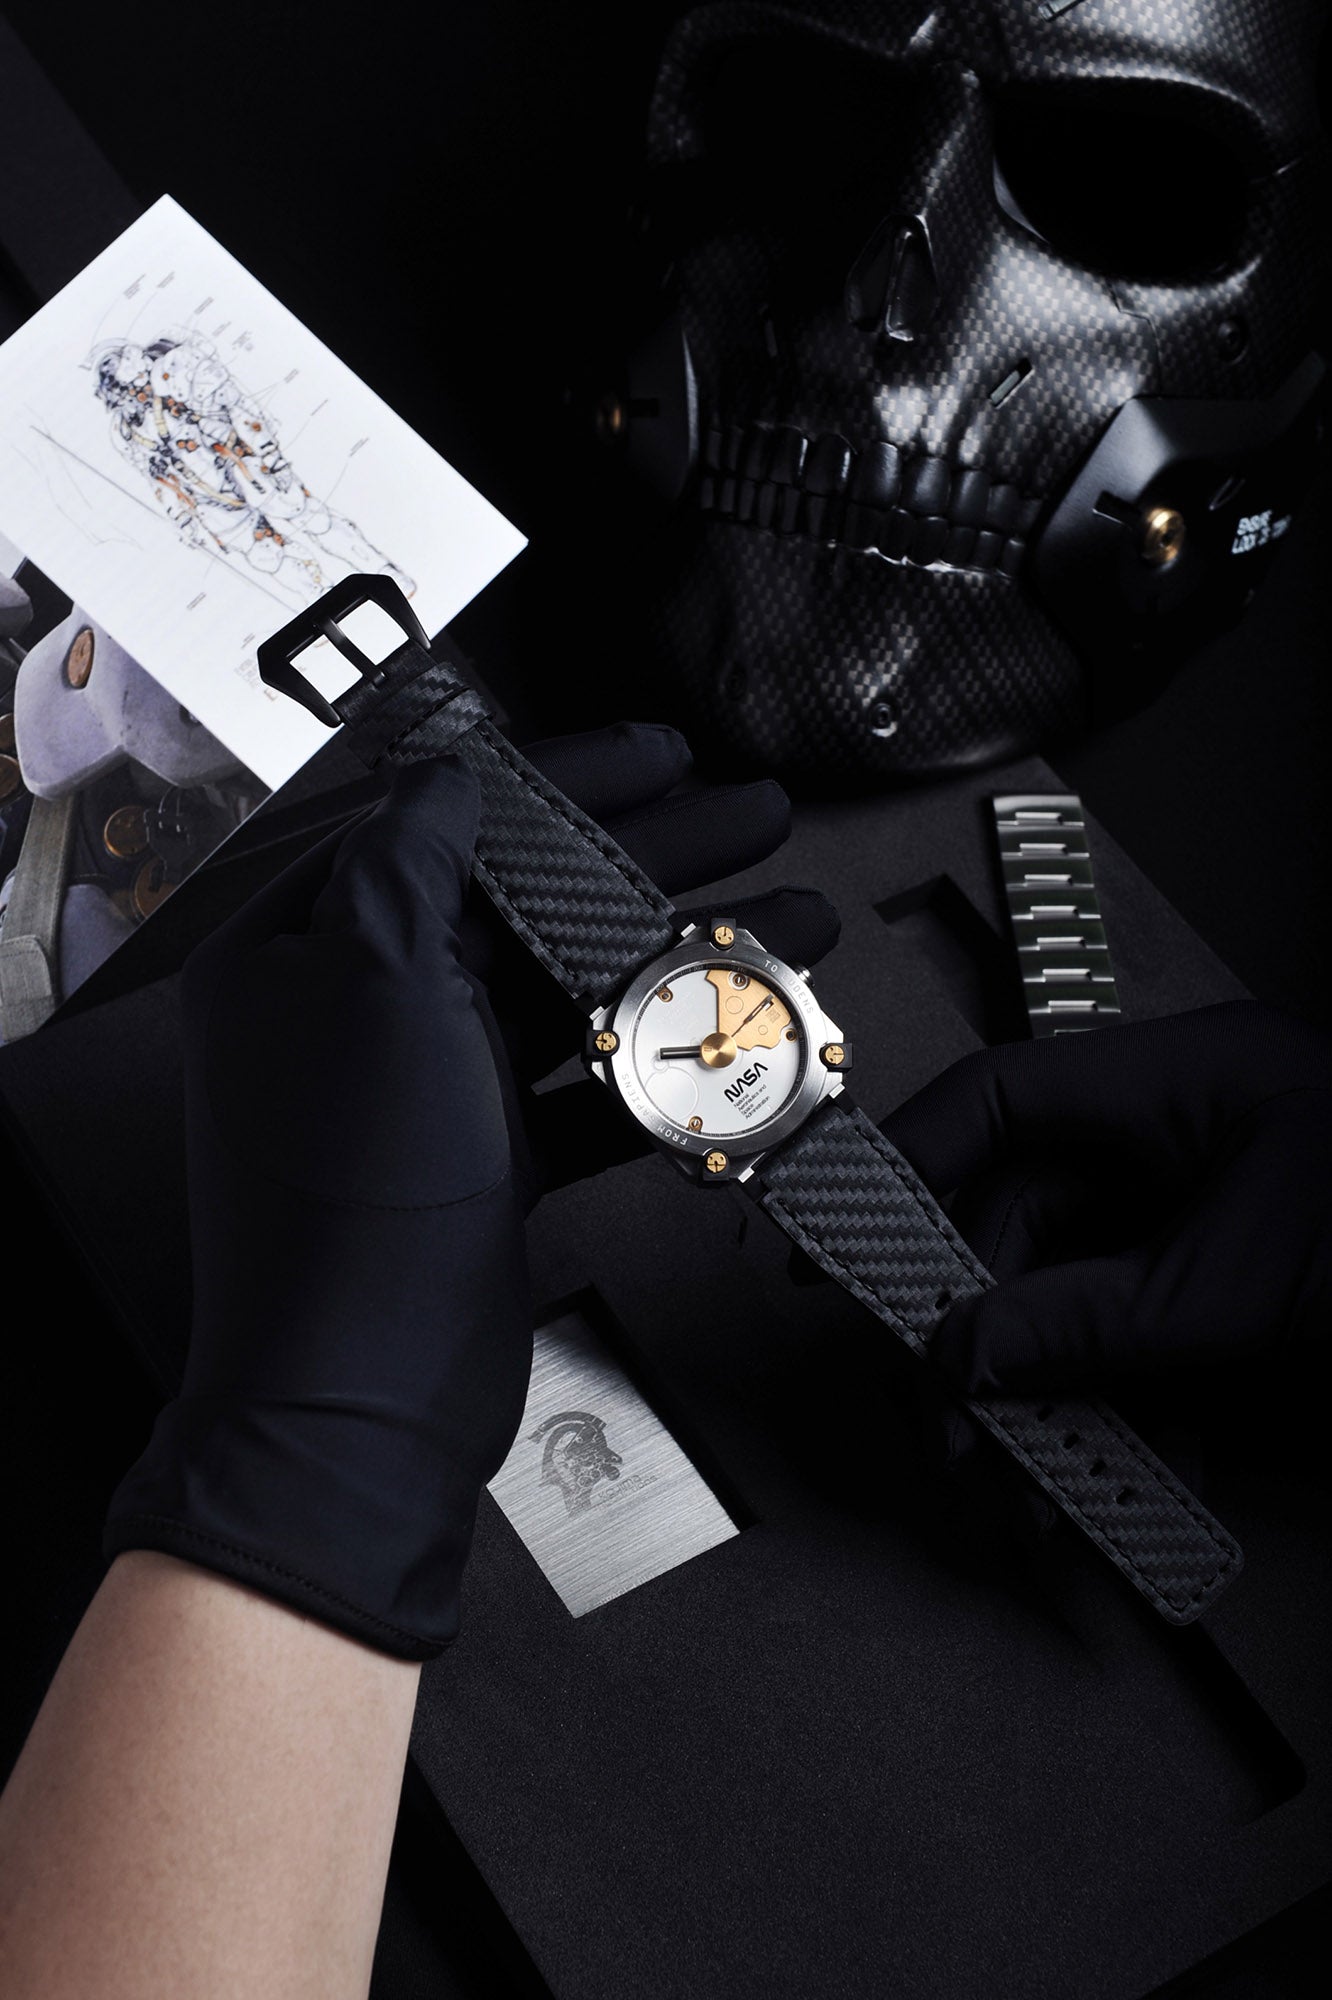 SPACE LUDENS is a “EVA Creative Suit on the wrist”. It reflects the ethos of Ludens who connects the elements of Play, Time and Space. The timepiece is designed by ANICORN, supervised by world-famous character designer Yoji Shinkawa (KOJIMA PRODUCTIONS) and officially approved by NASA.